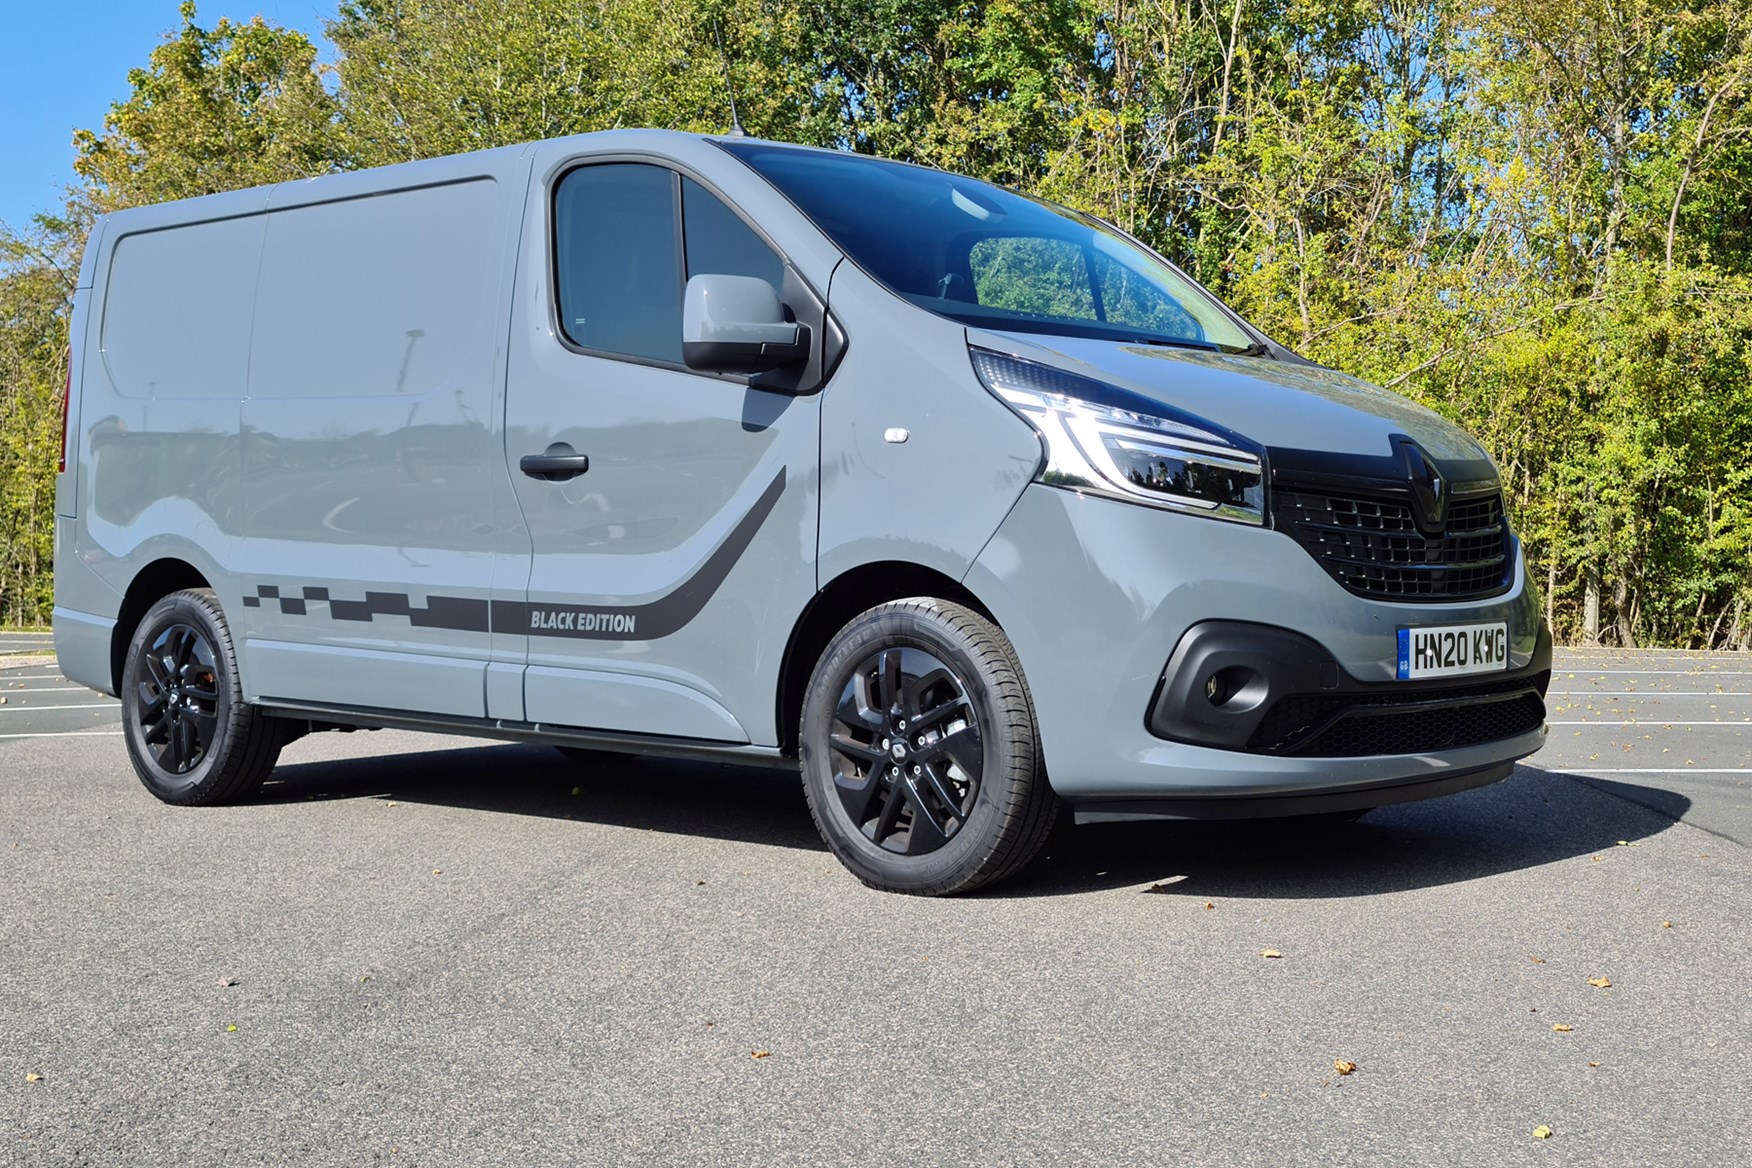 2017 renault trafic for sale